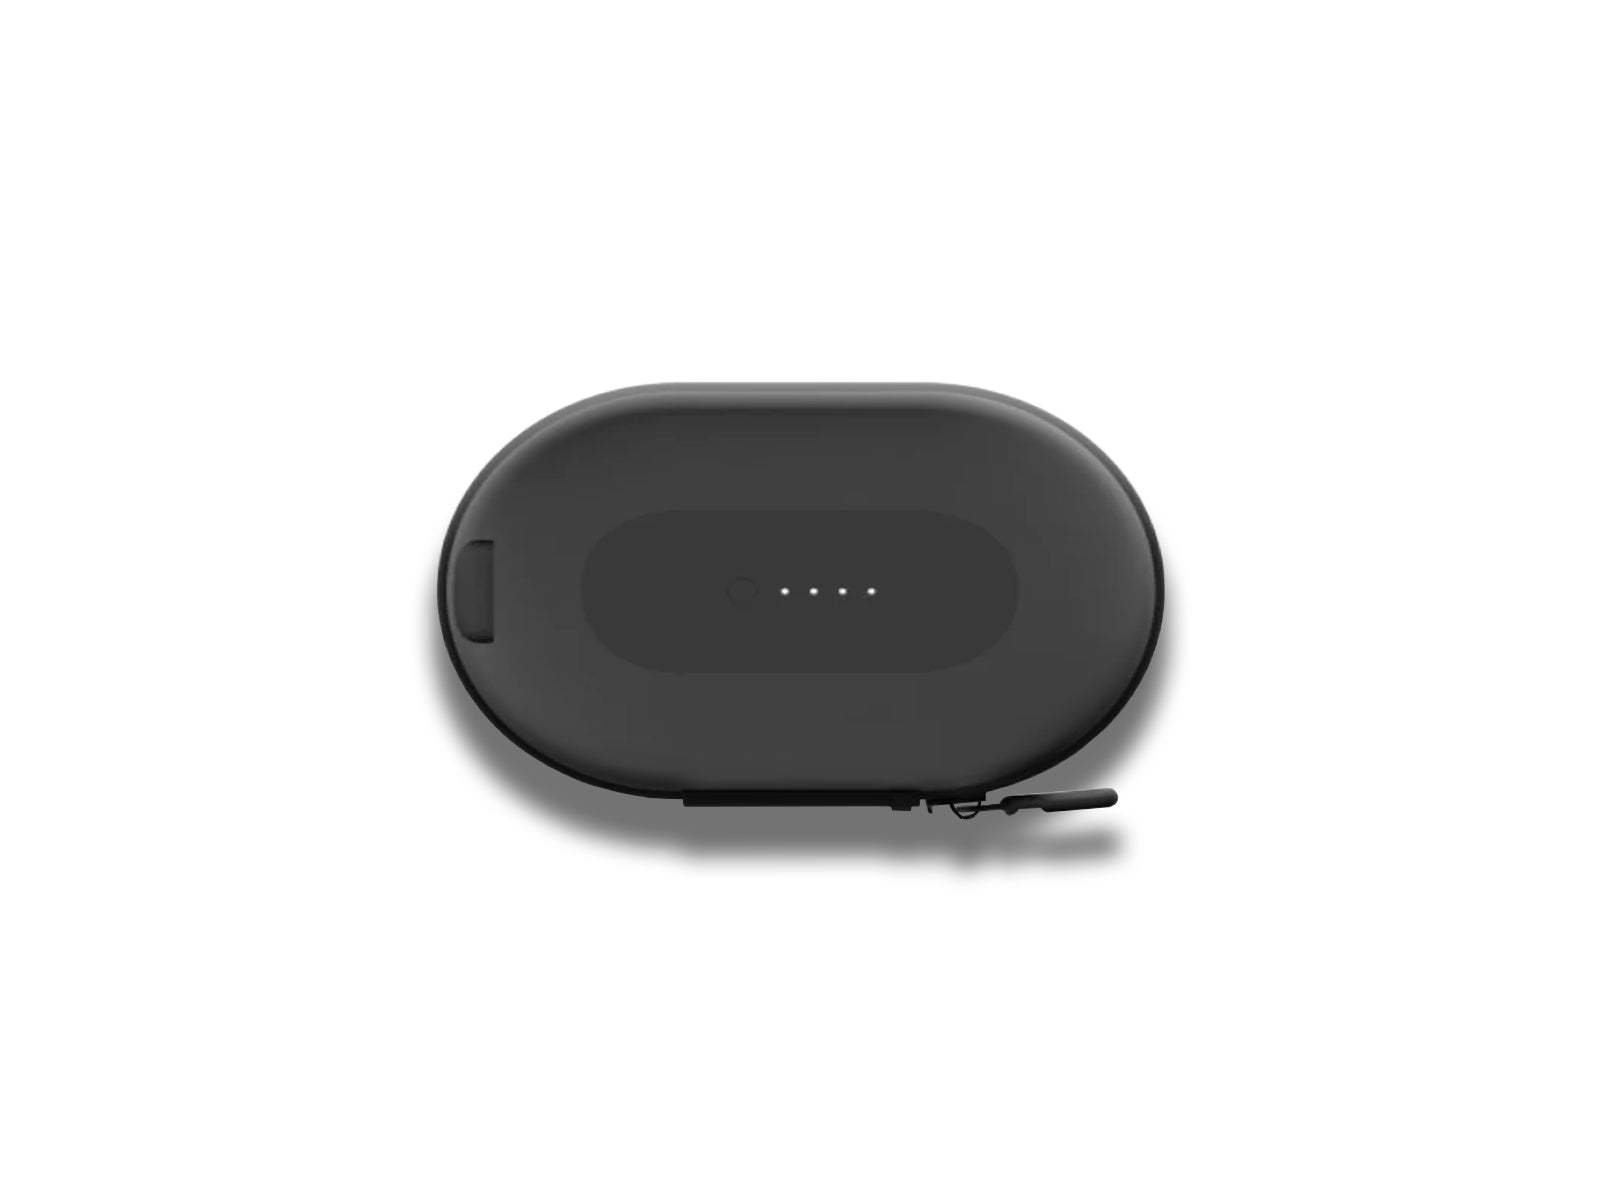 Image shows a bottom veiw of the Mophie Portable Power Capsule Charger For Wireless Headphones on a white background